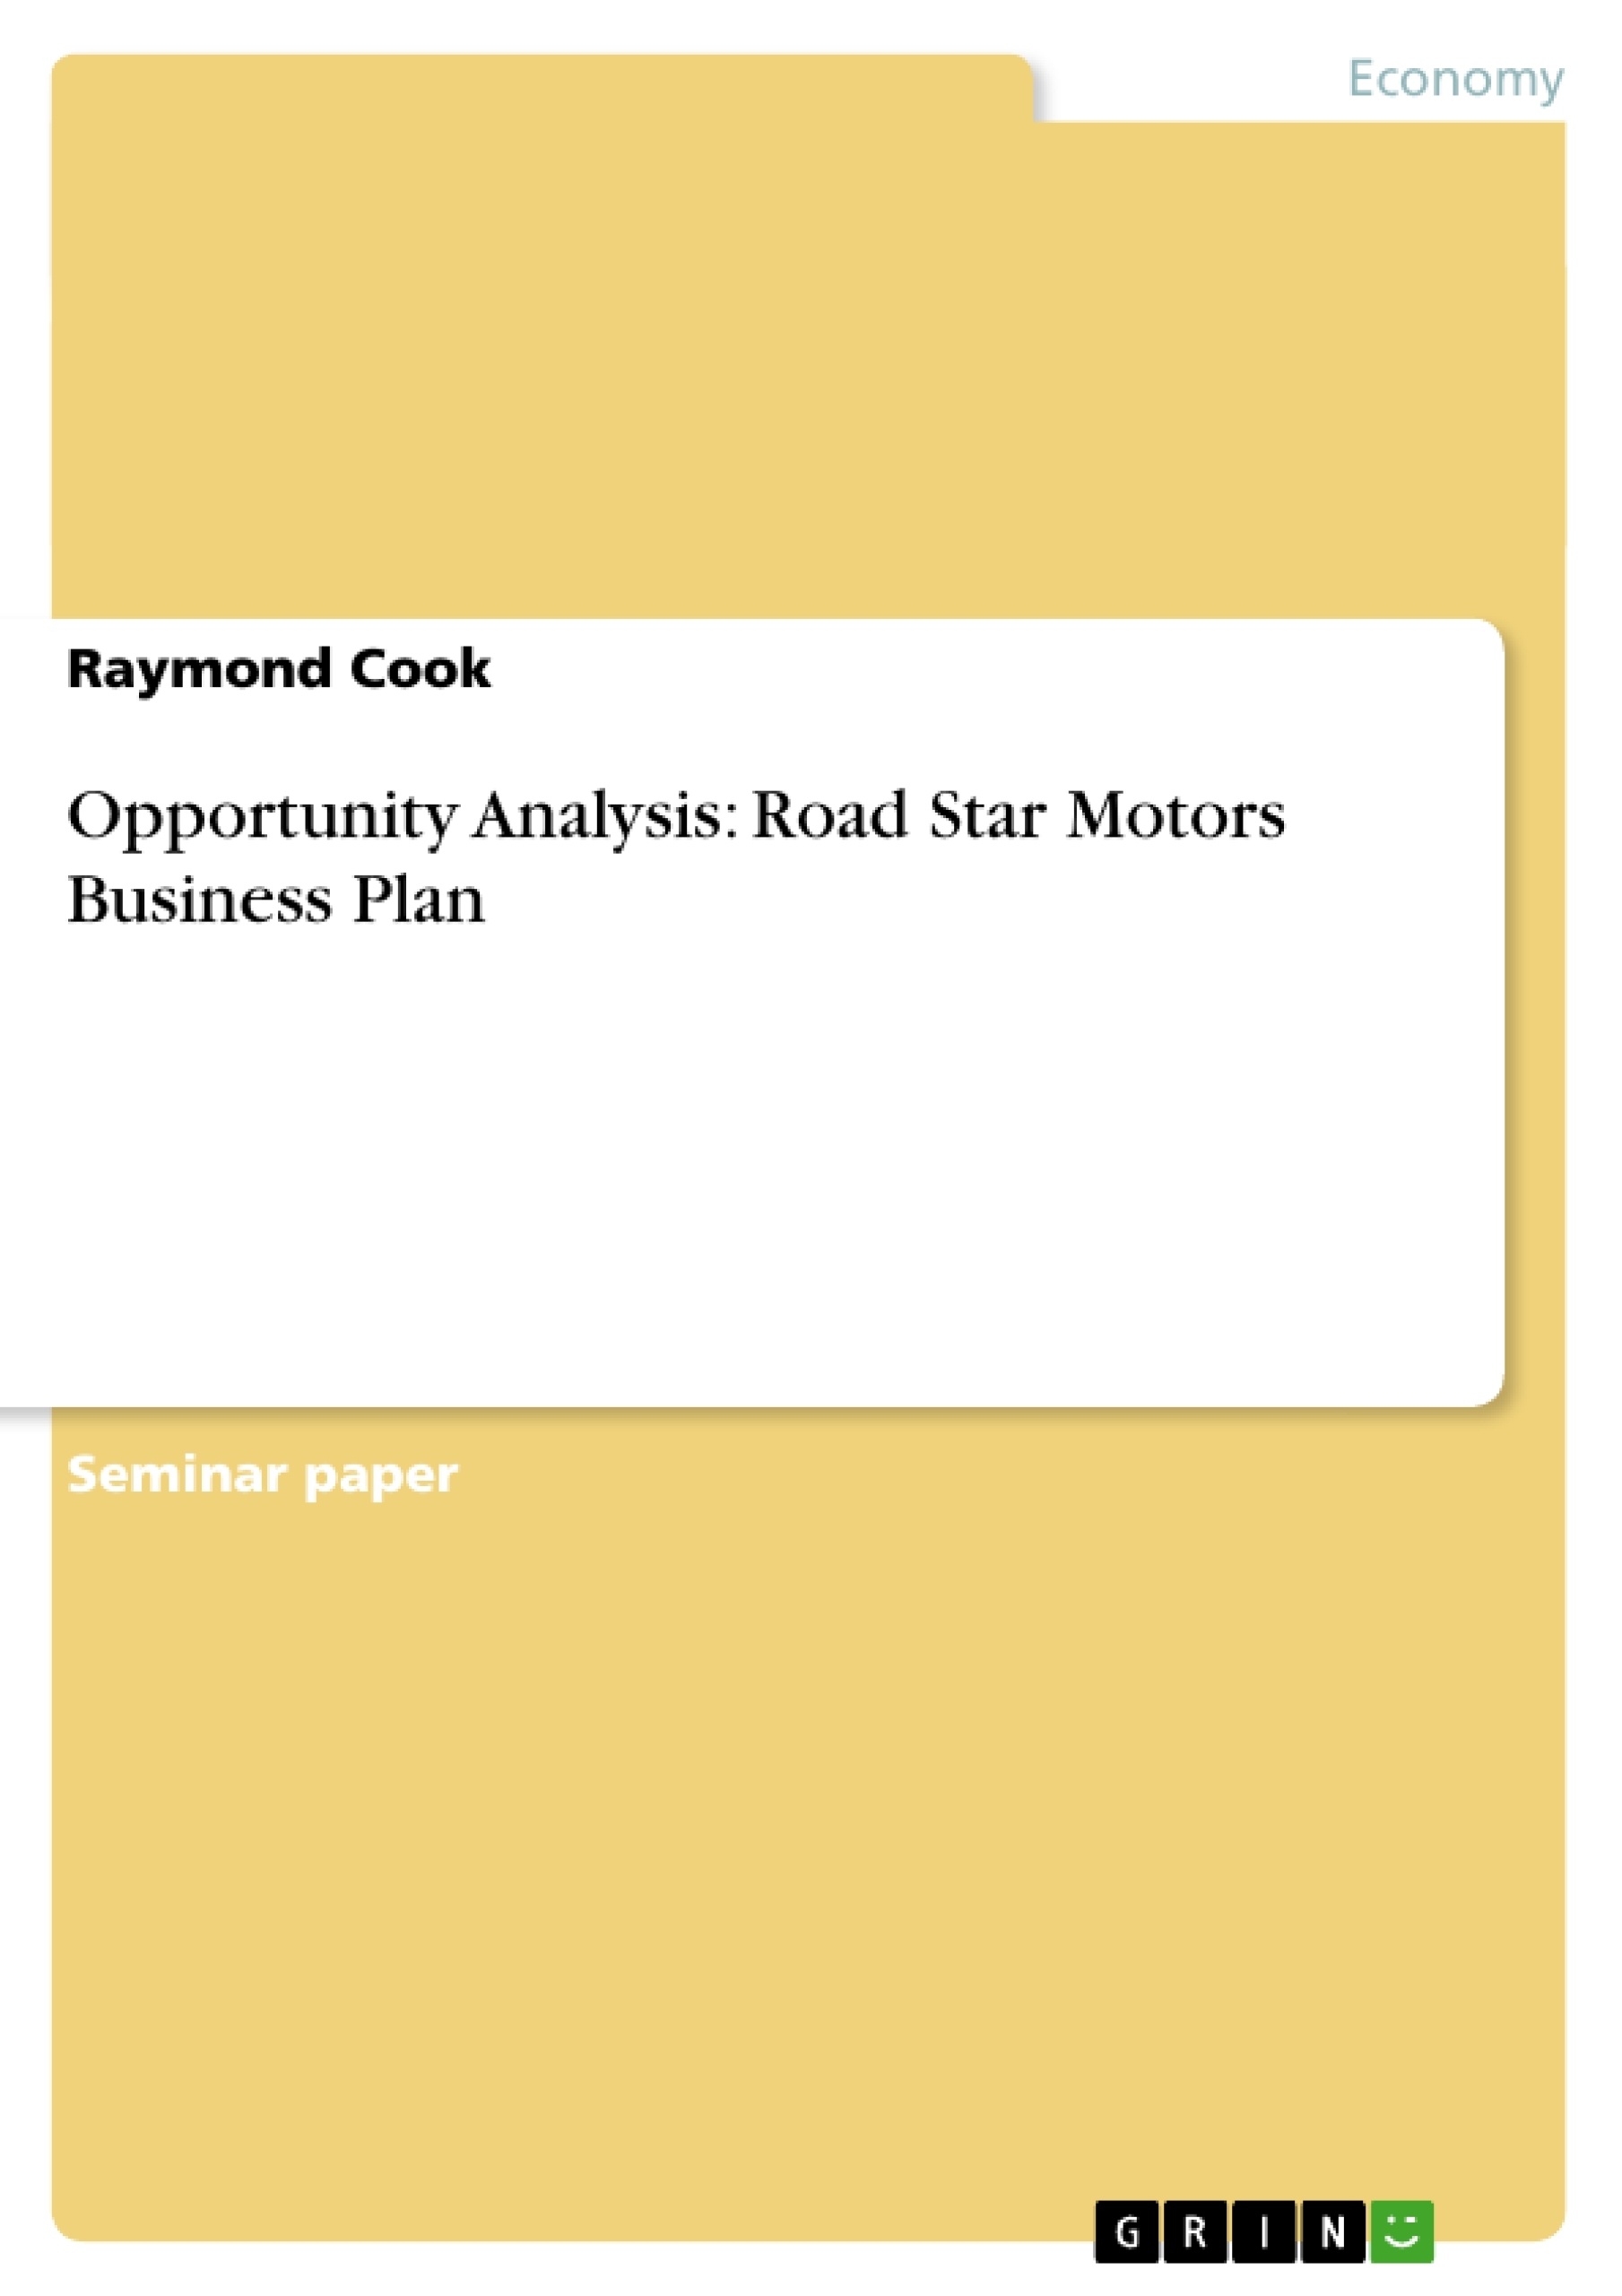 Title: Opportunity Analysis: Road Star Motors Business Plan